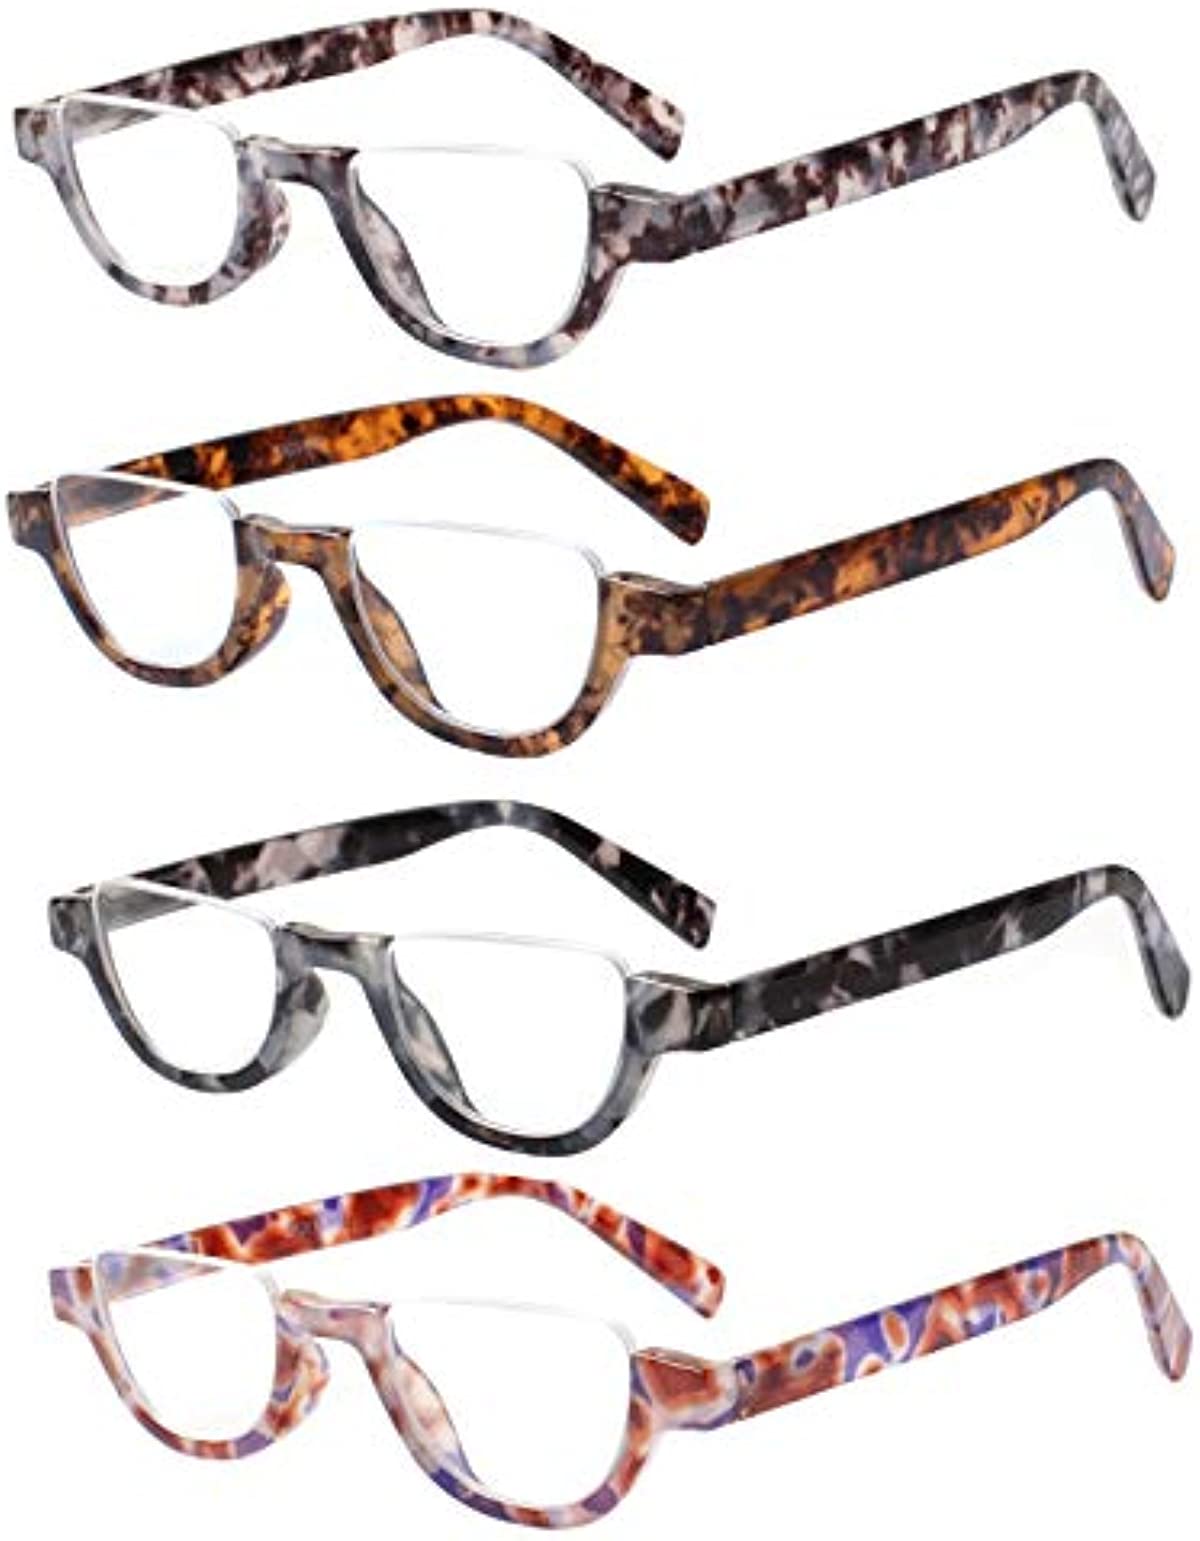 4 Pairs of Colorful Fashion Half Moon Frame Reading Glasses Spring Hinge Male and Female Readers